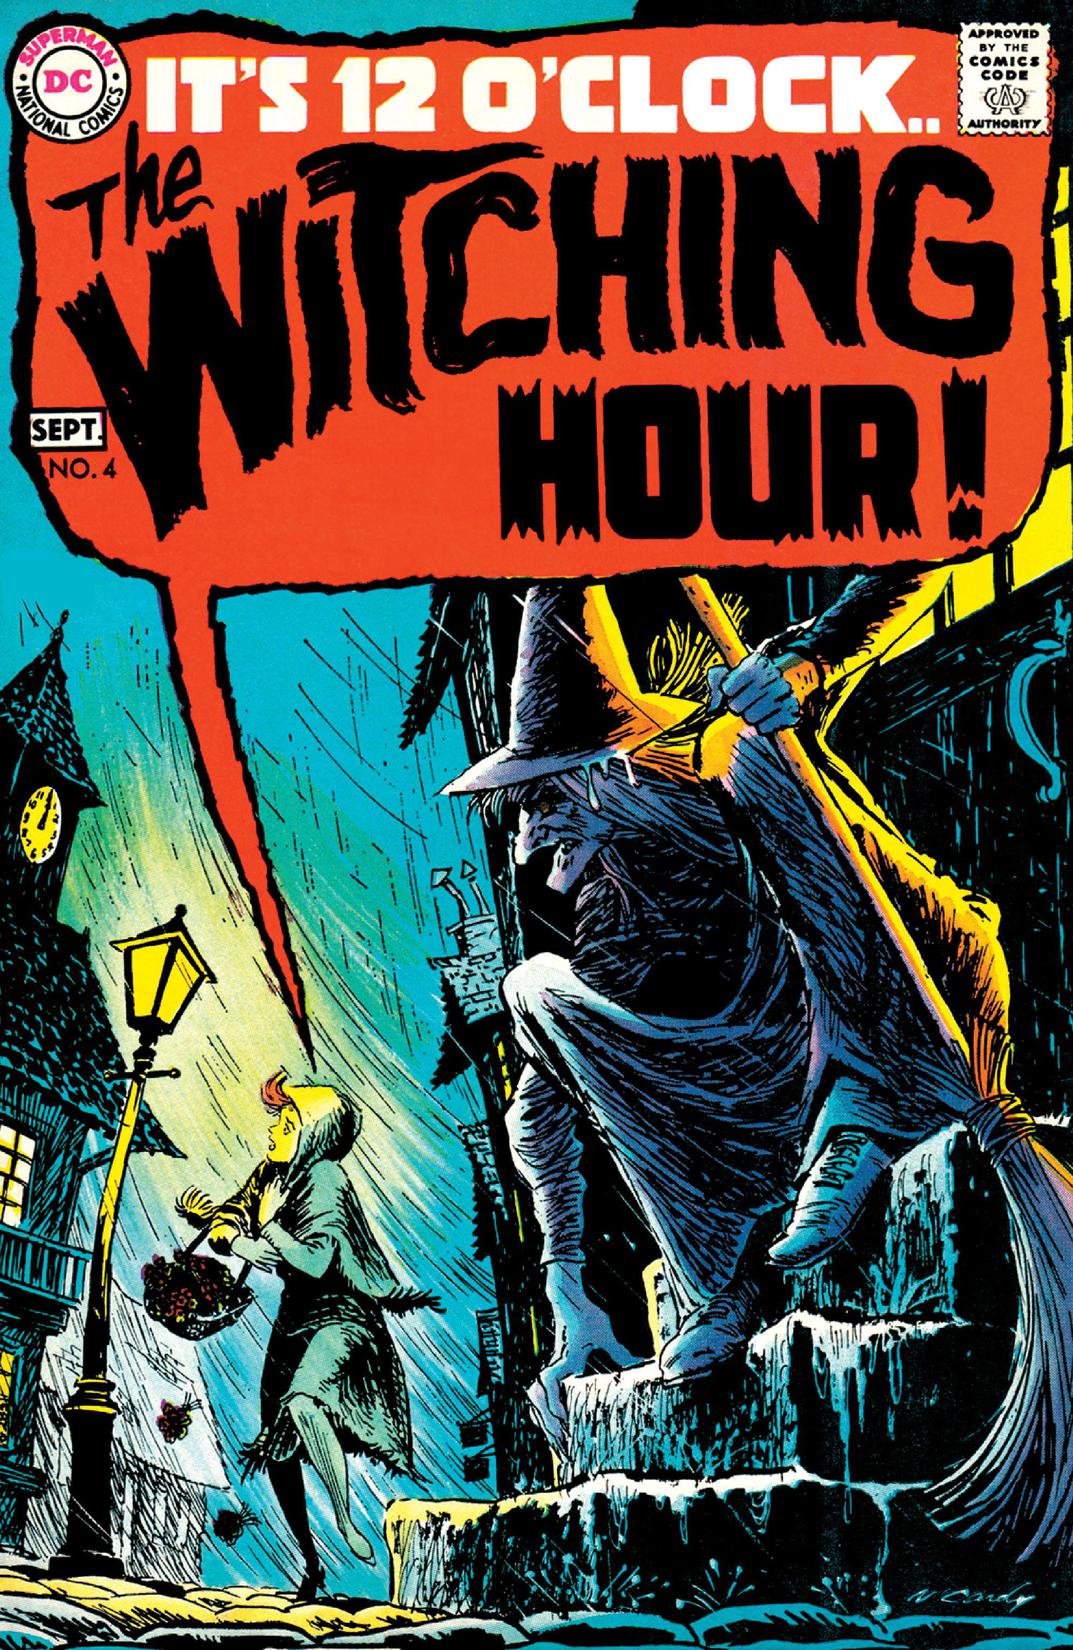 The Witching Hour #4 preview images